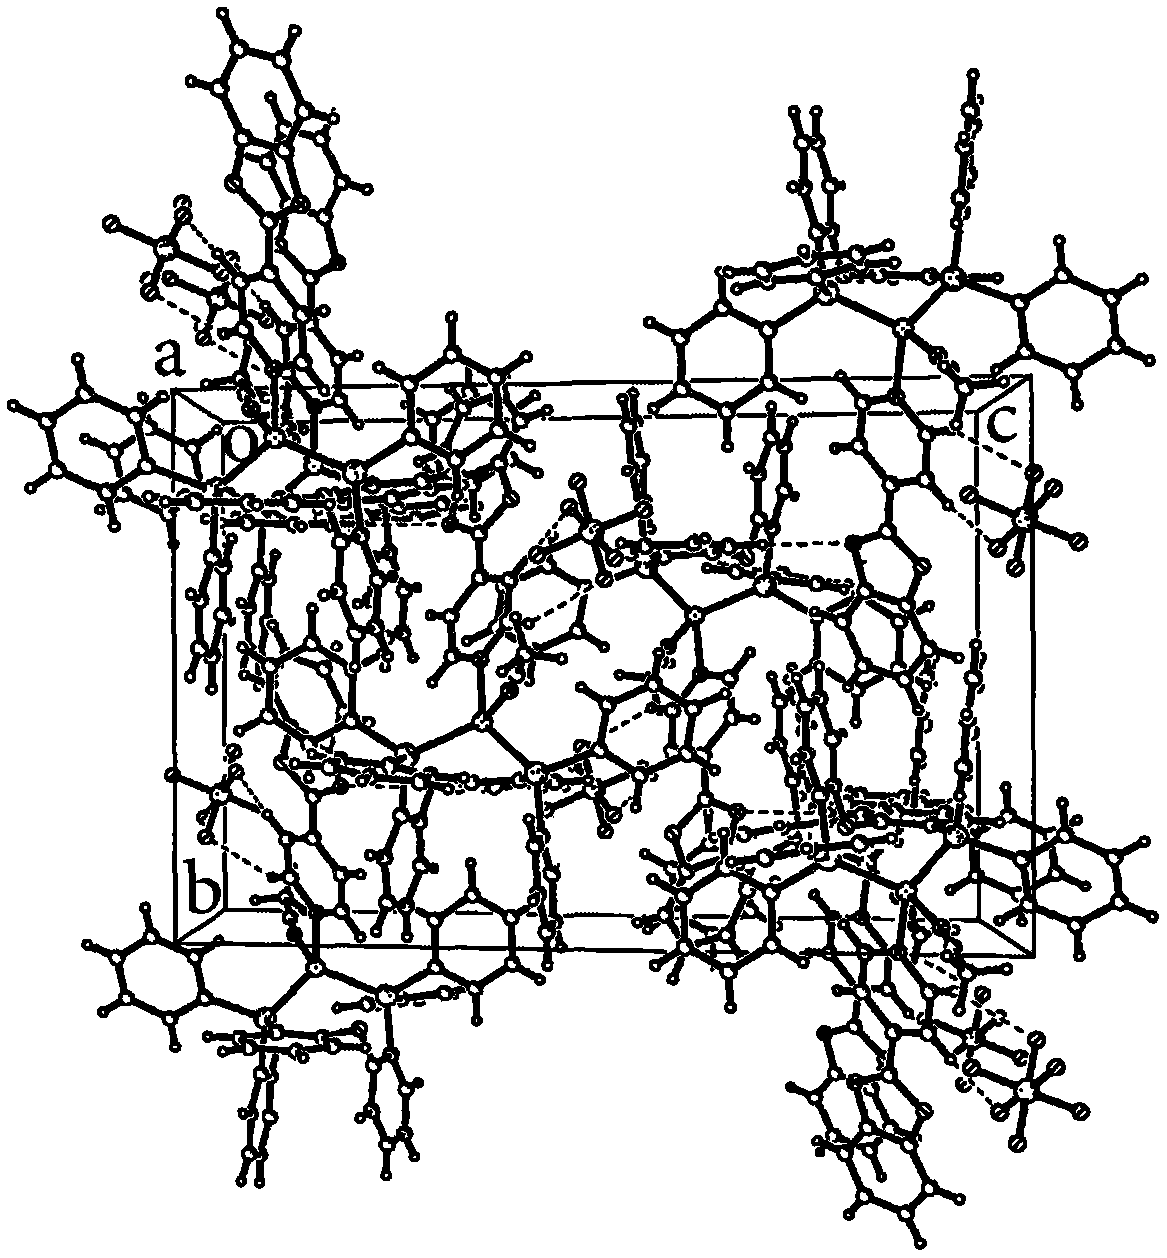 Tetrahedral cuprous complex luminescent material containing oxazolyl pyridine ligands